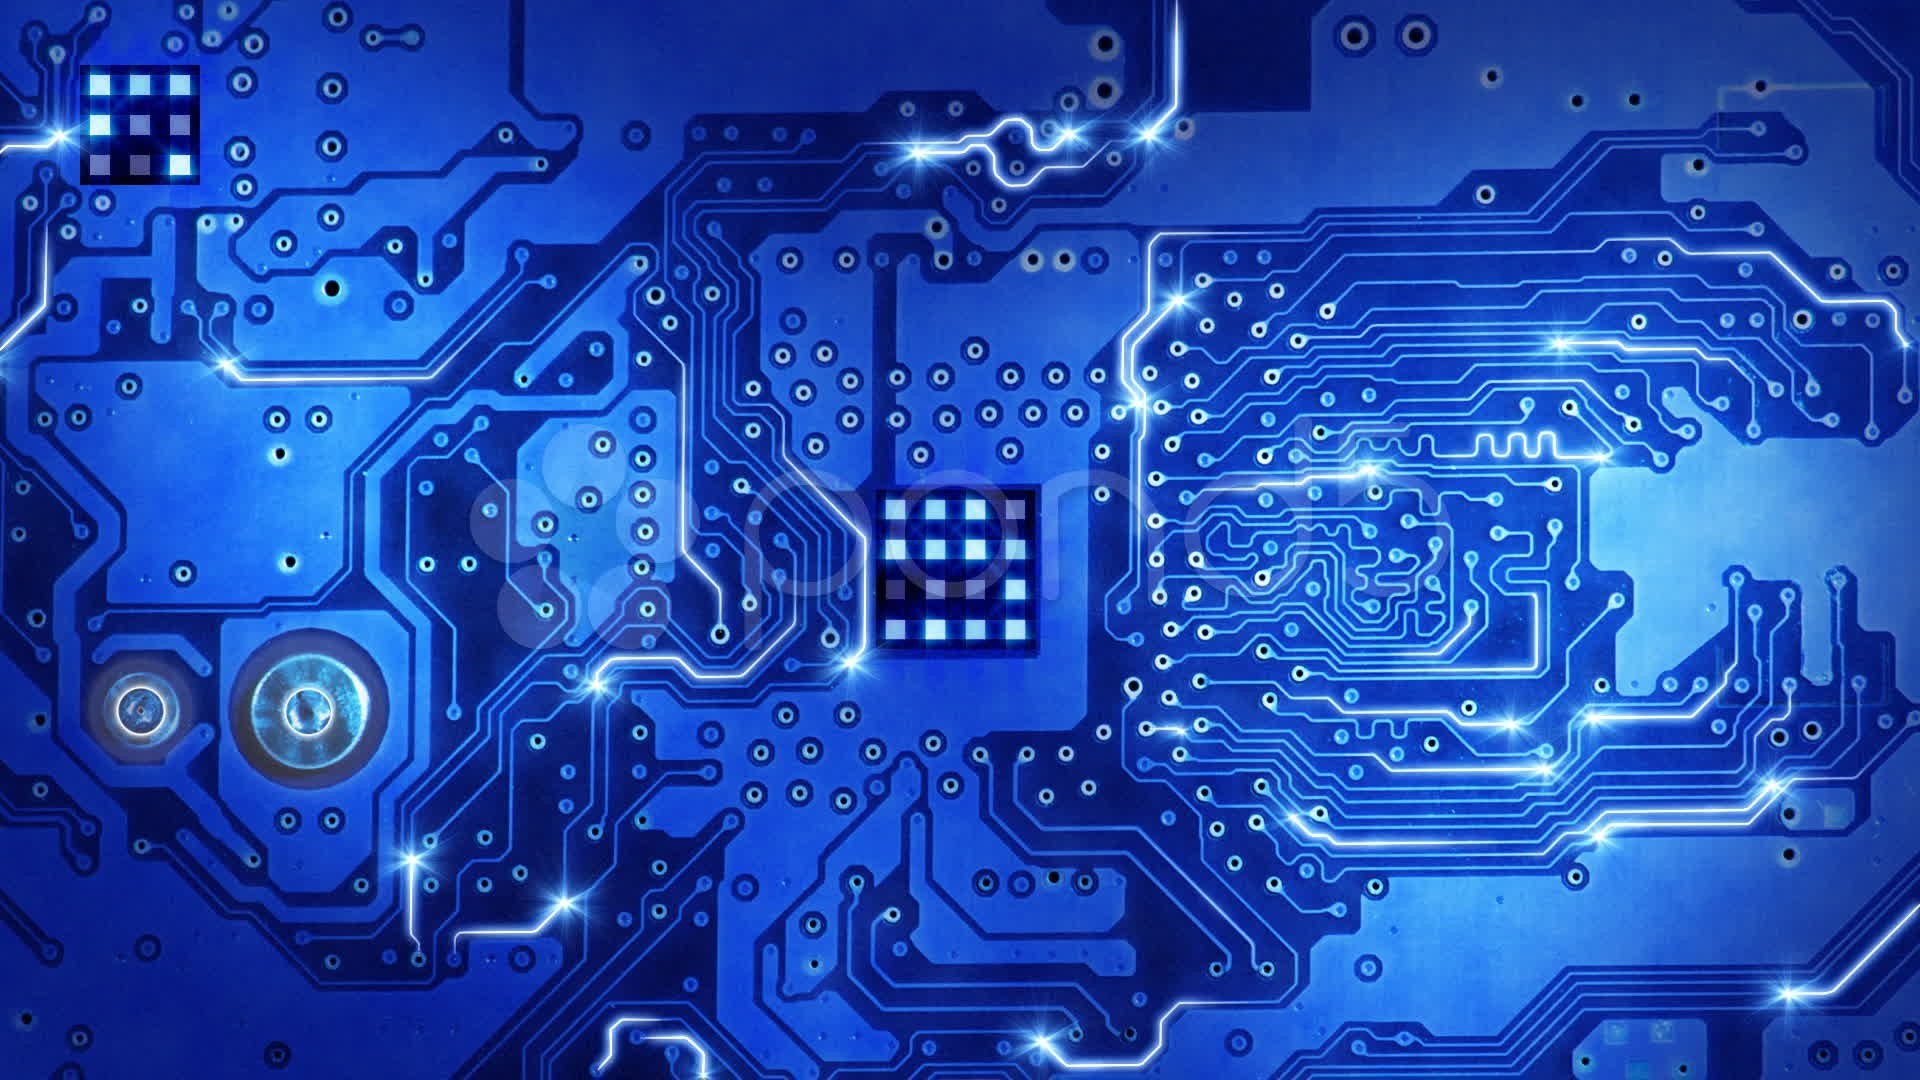 motherboard wallpaper, electronic engineering, blue, motherboard, electronics, water